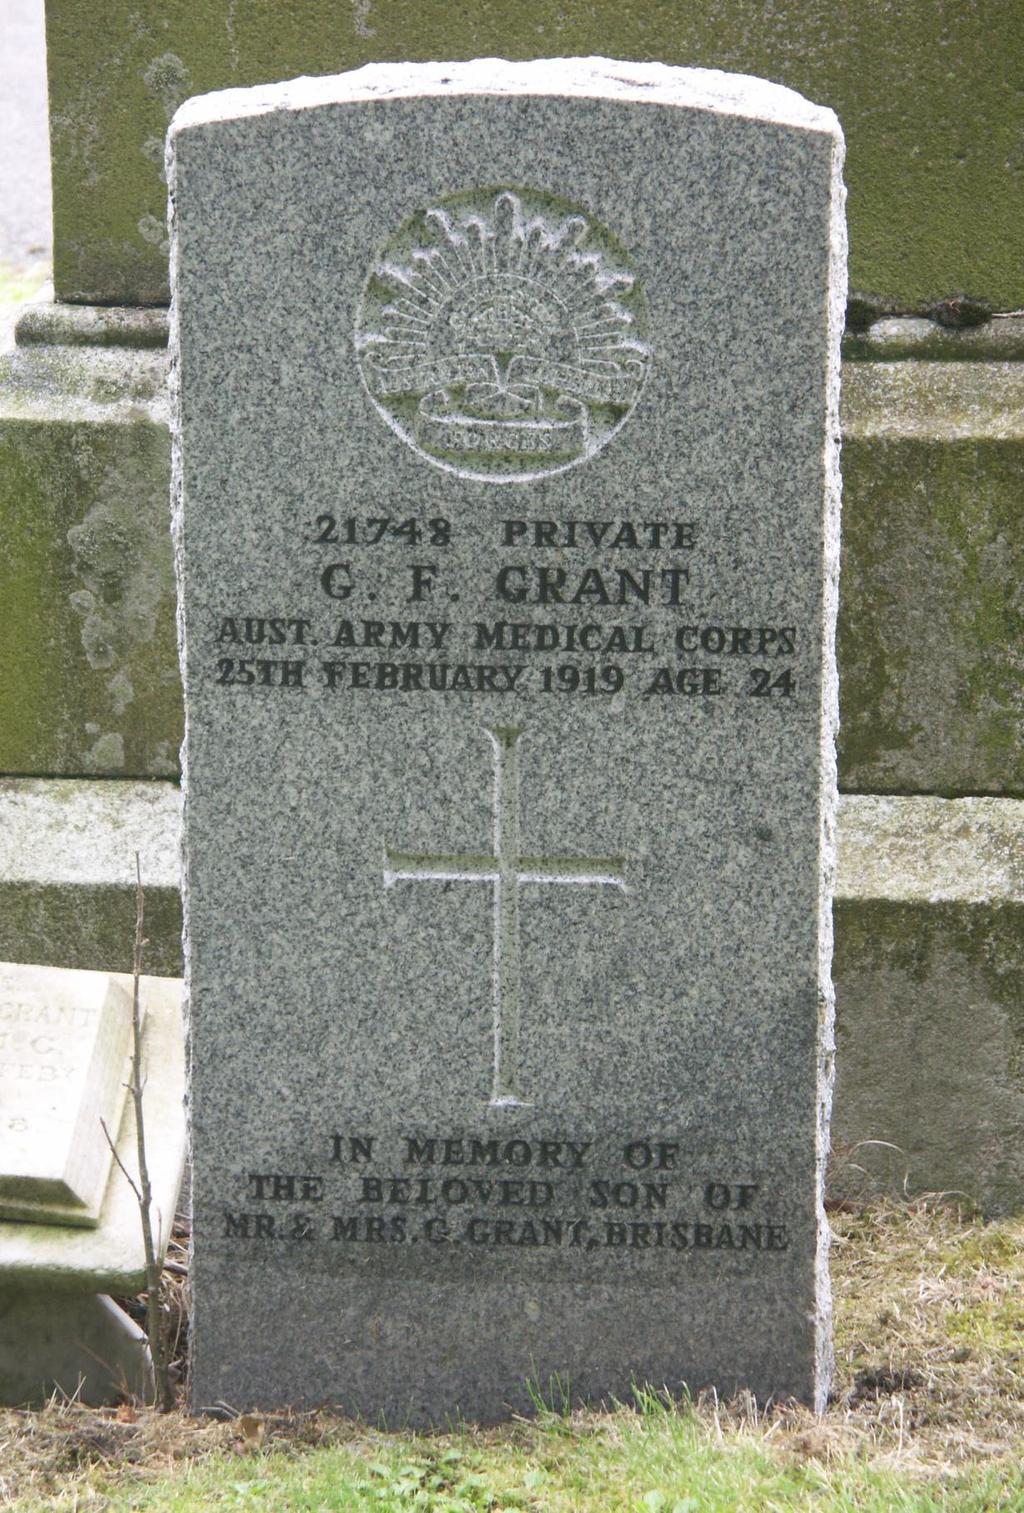 Photo of Pte G. F.